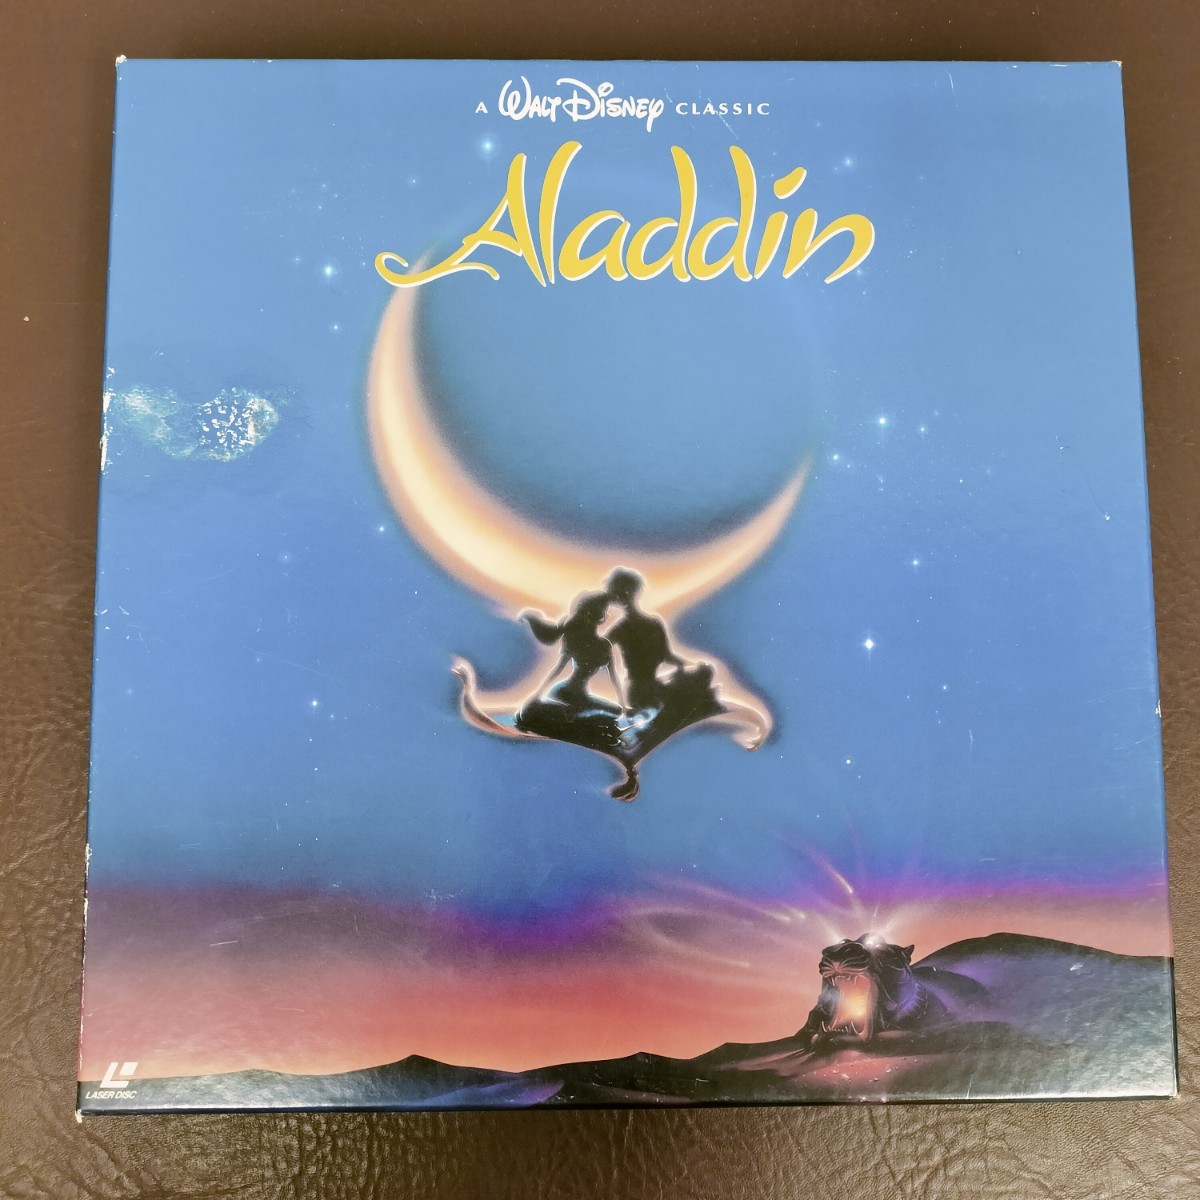 [ used ]LD BOX special collection [ Aladdin ] laser disk 3 sheets set gorgeous explanation book@(120.) attaching Walt Disney CLASSIC Pioneer LDC